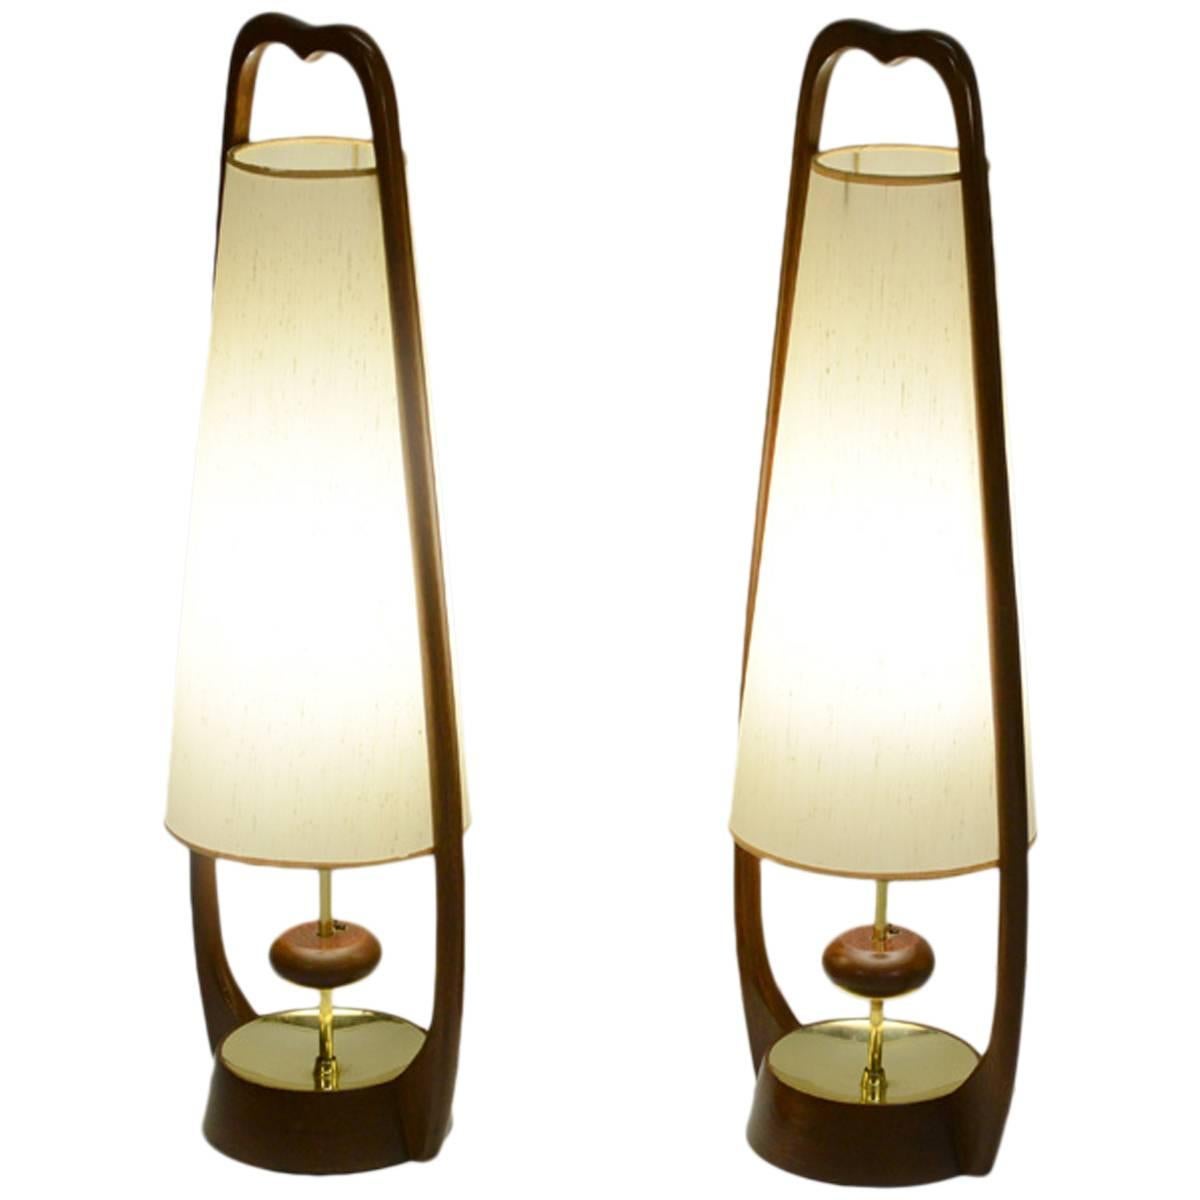 Pair of Sculptural Table Lamps by Modeline